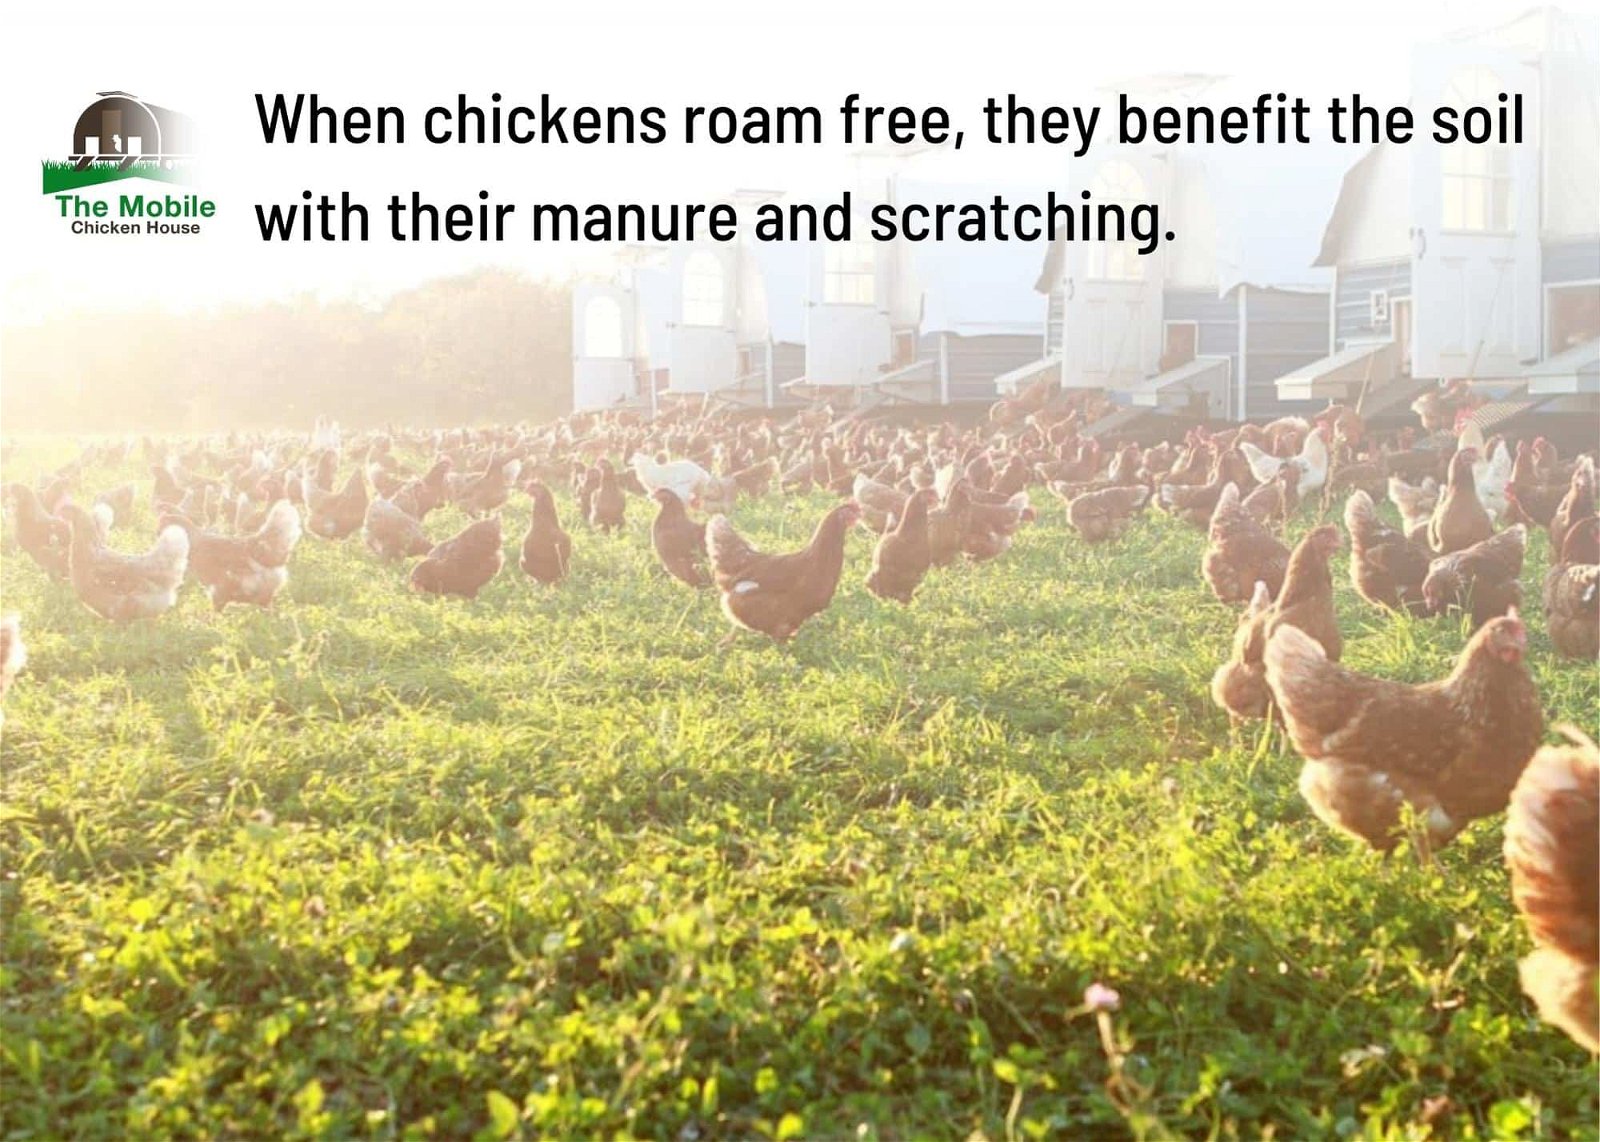 Pasture raised chickens benefit the soil